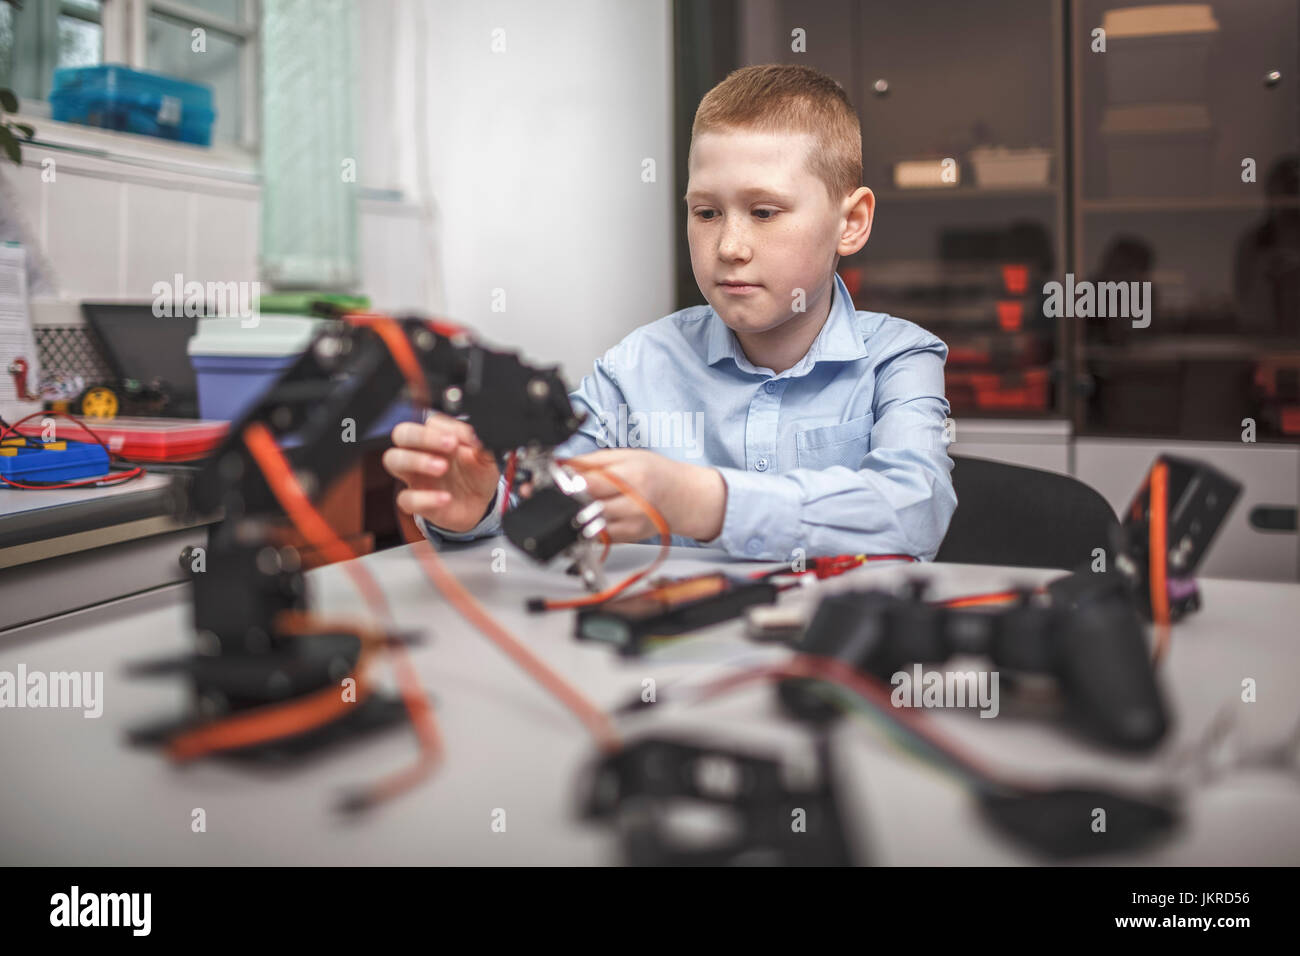 Serious boy operating machinery at table in classroom Stock Photo